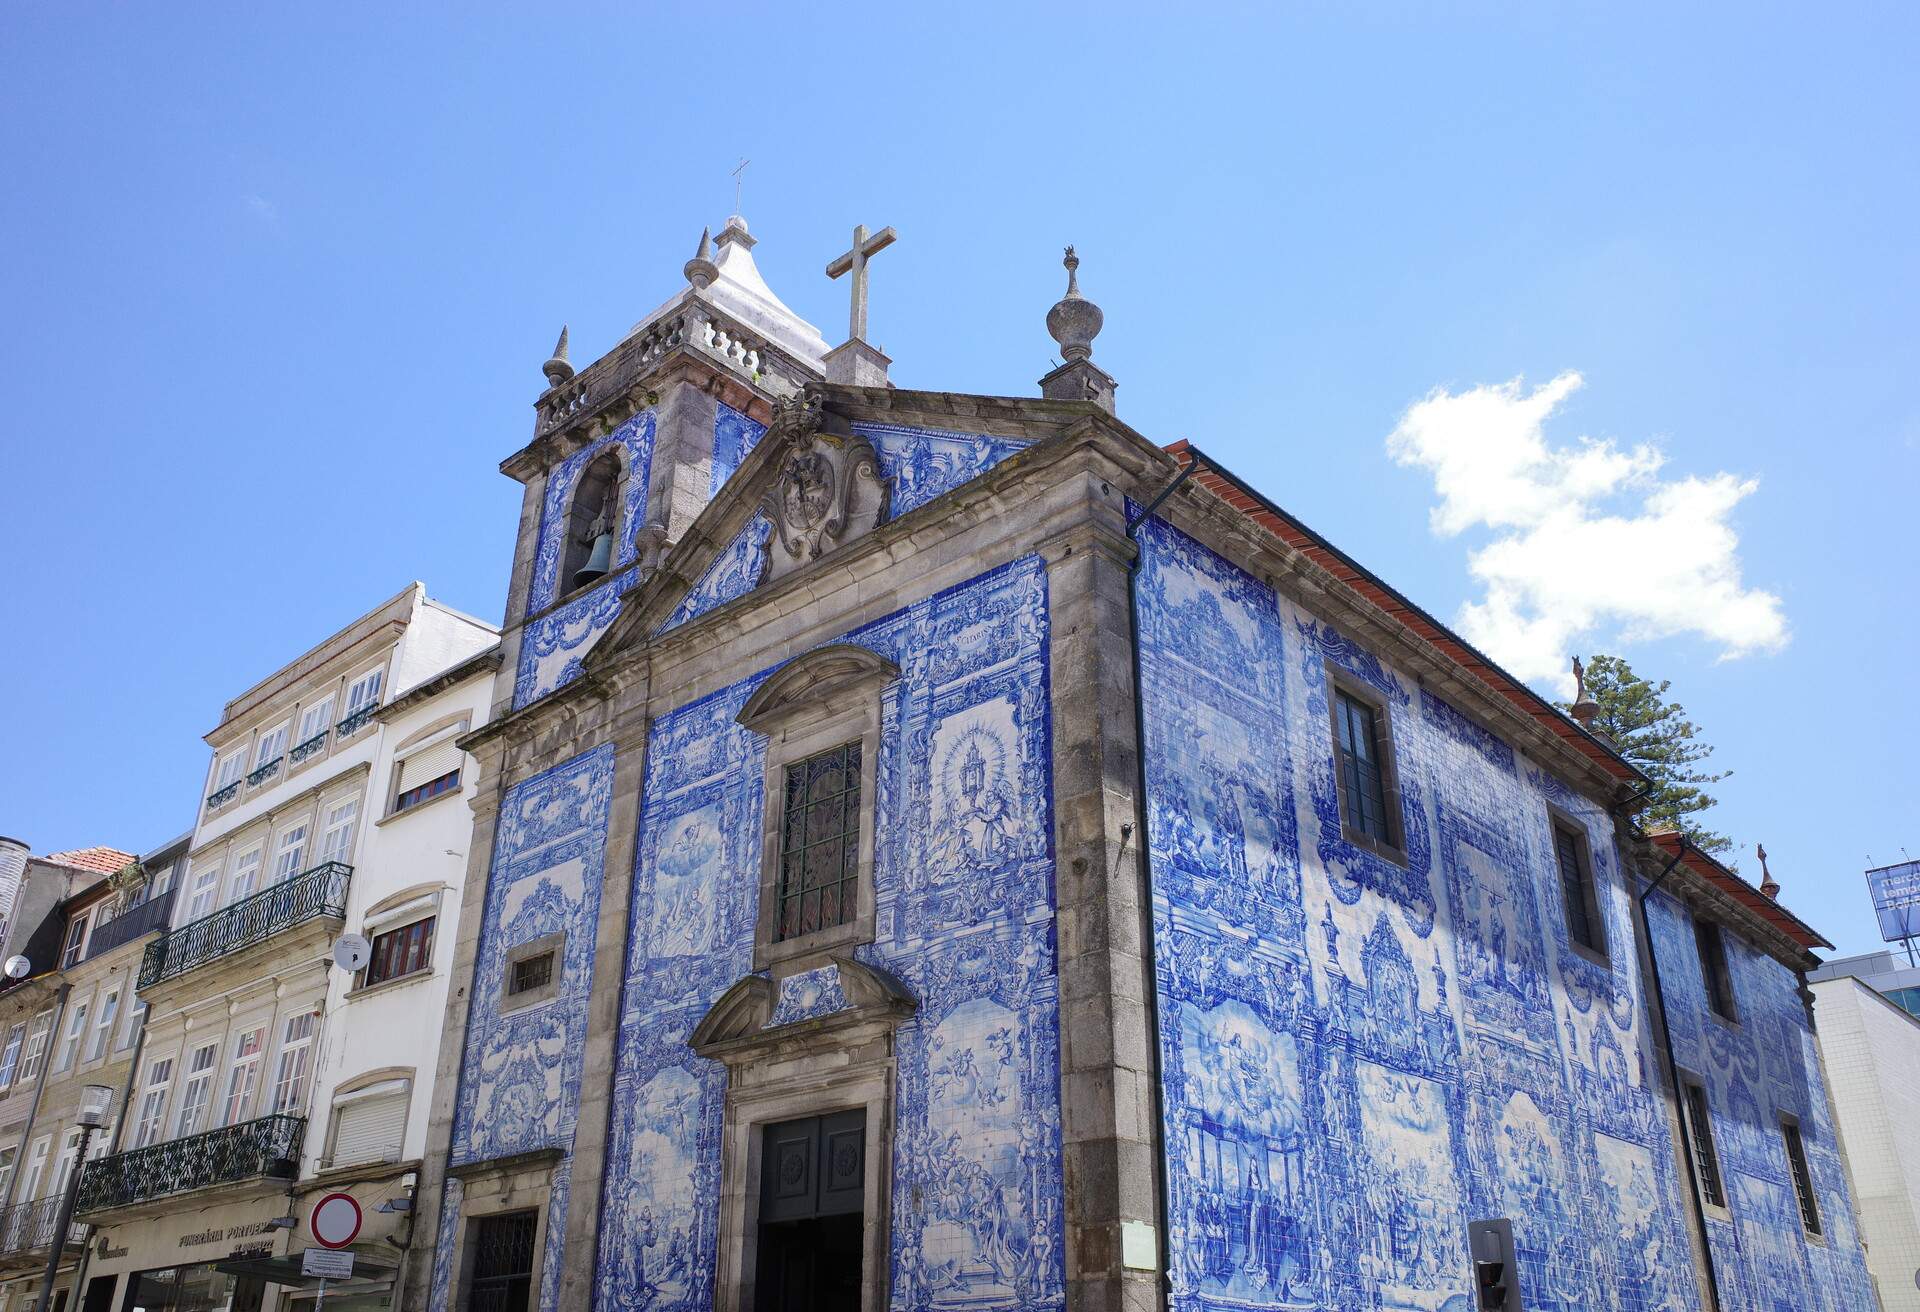 A stunning stone church beautifully embellished with vibrant and intricate azulejo tiles.